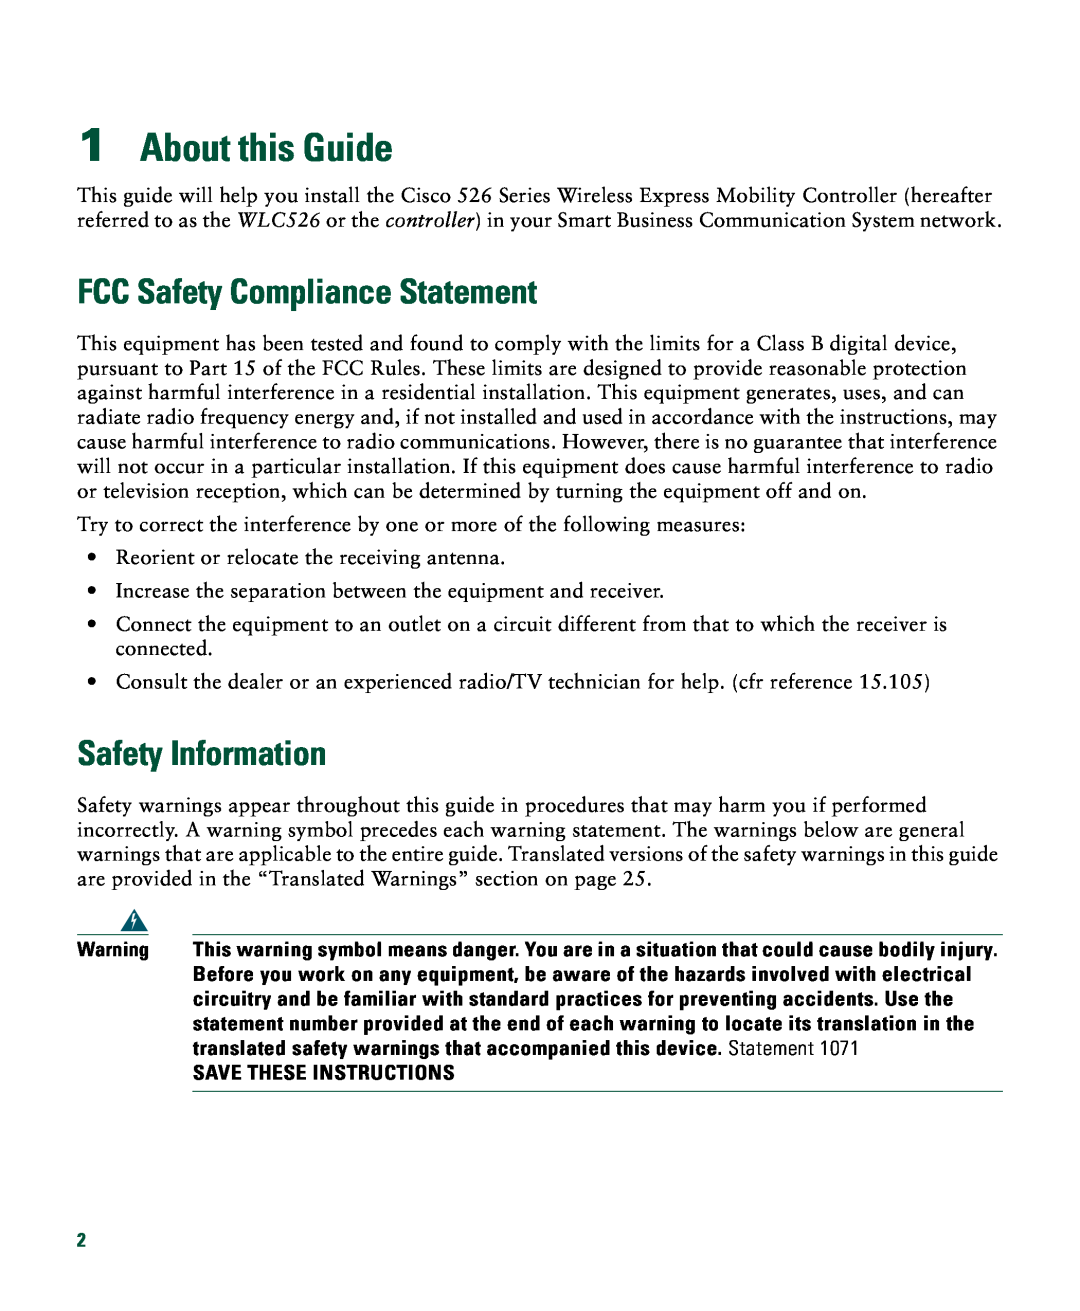 Cisco Systems 526 About this Guide, FCC Safety Compliance Statement, Safety Information, Save These Instructions 